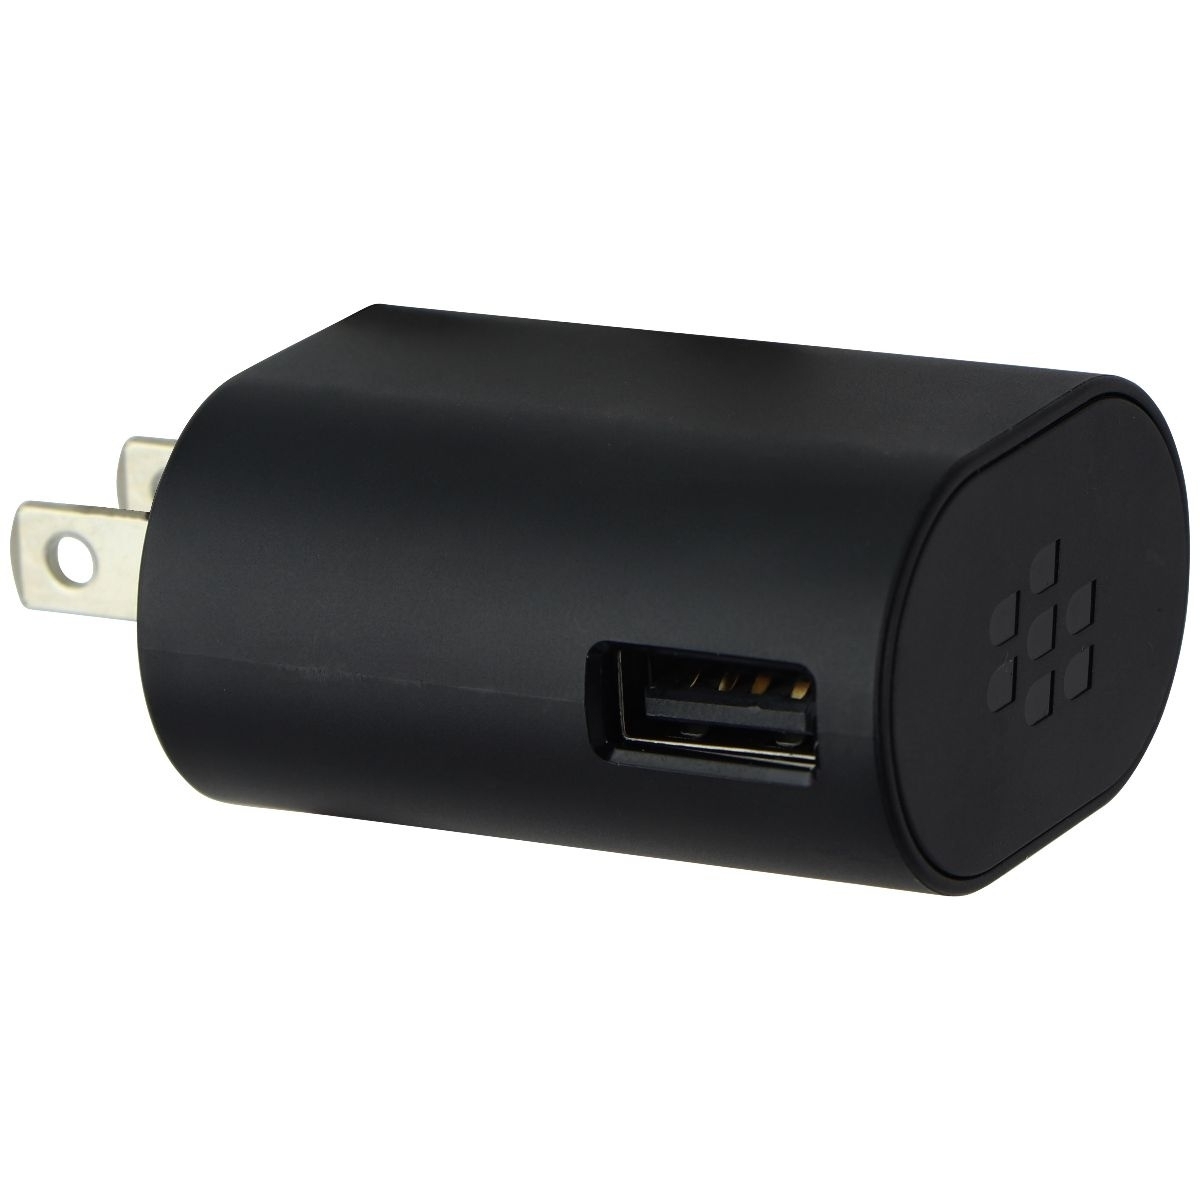 BlackBerry (5V/1.3A) Single USB Wall Charger Travel Adapter - Black (RM0302)